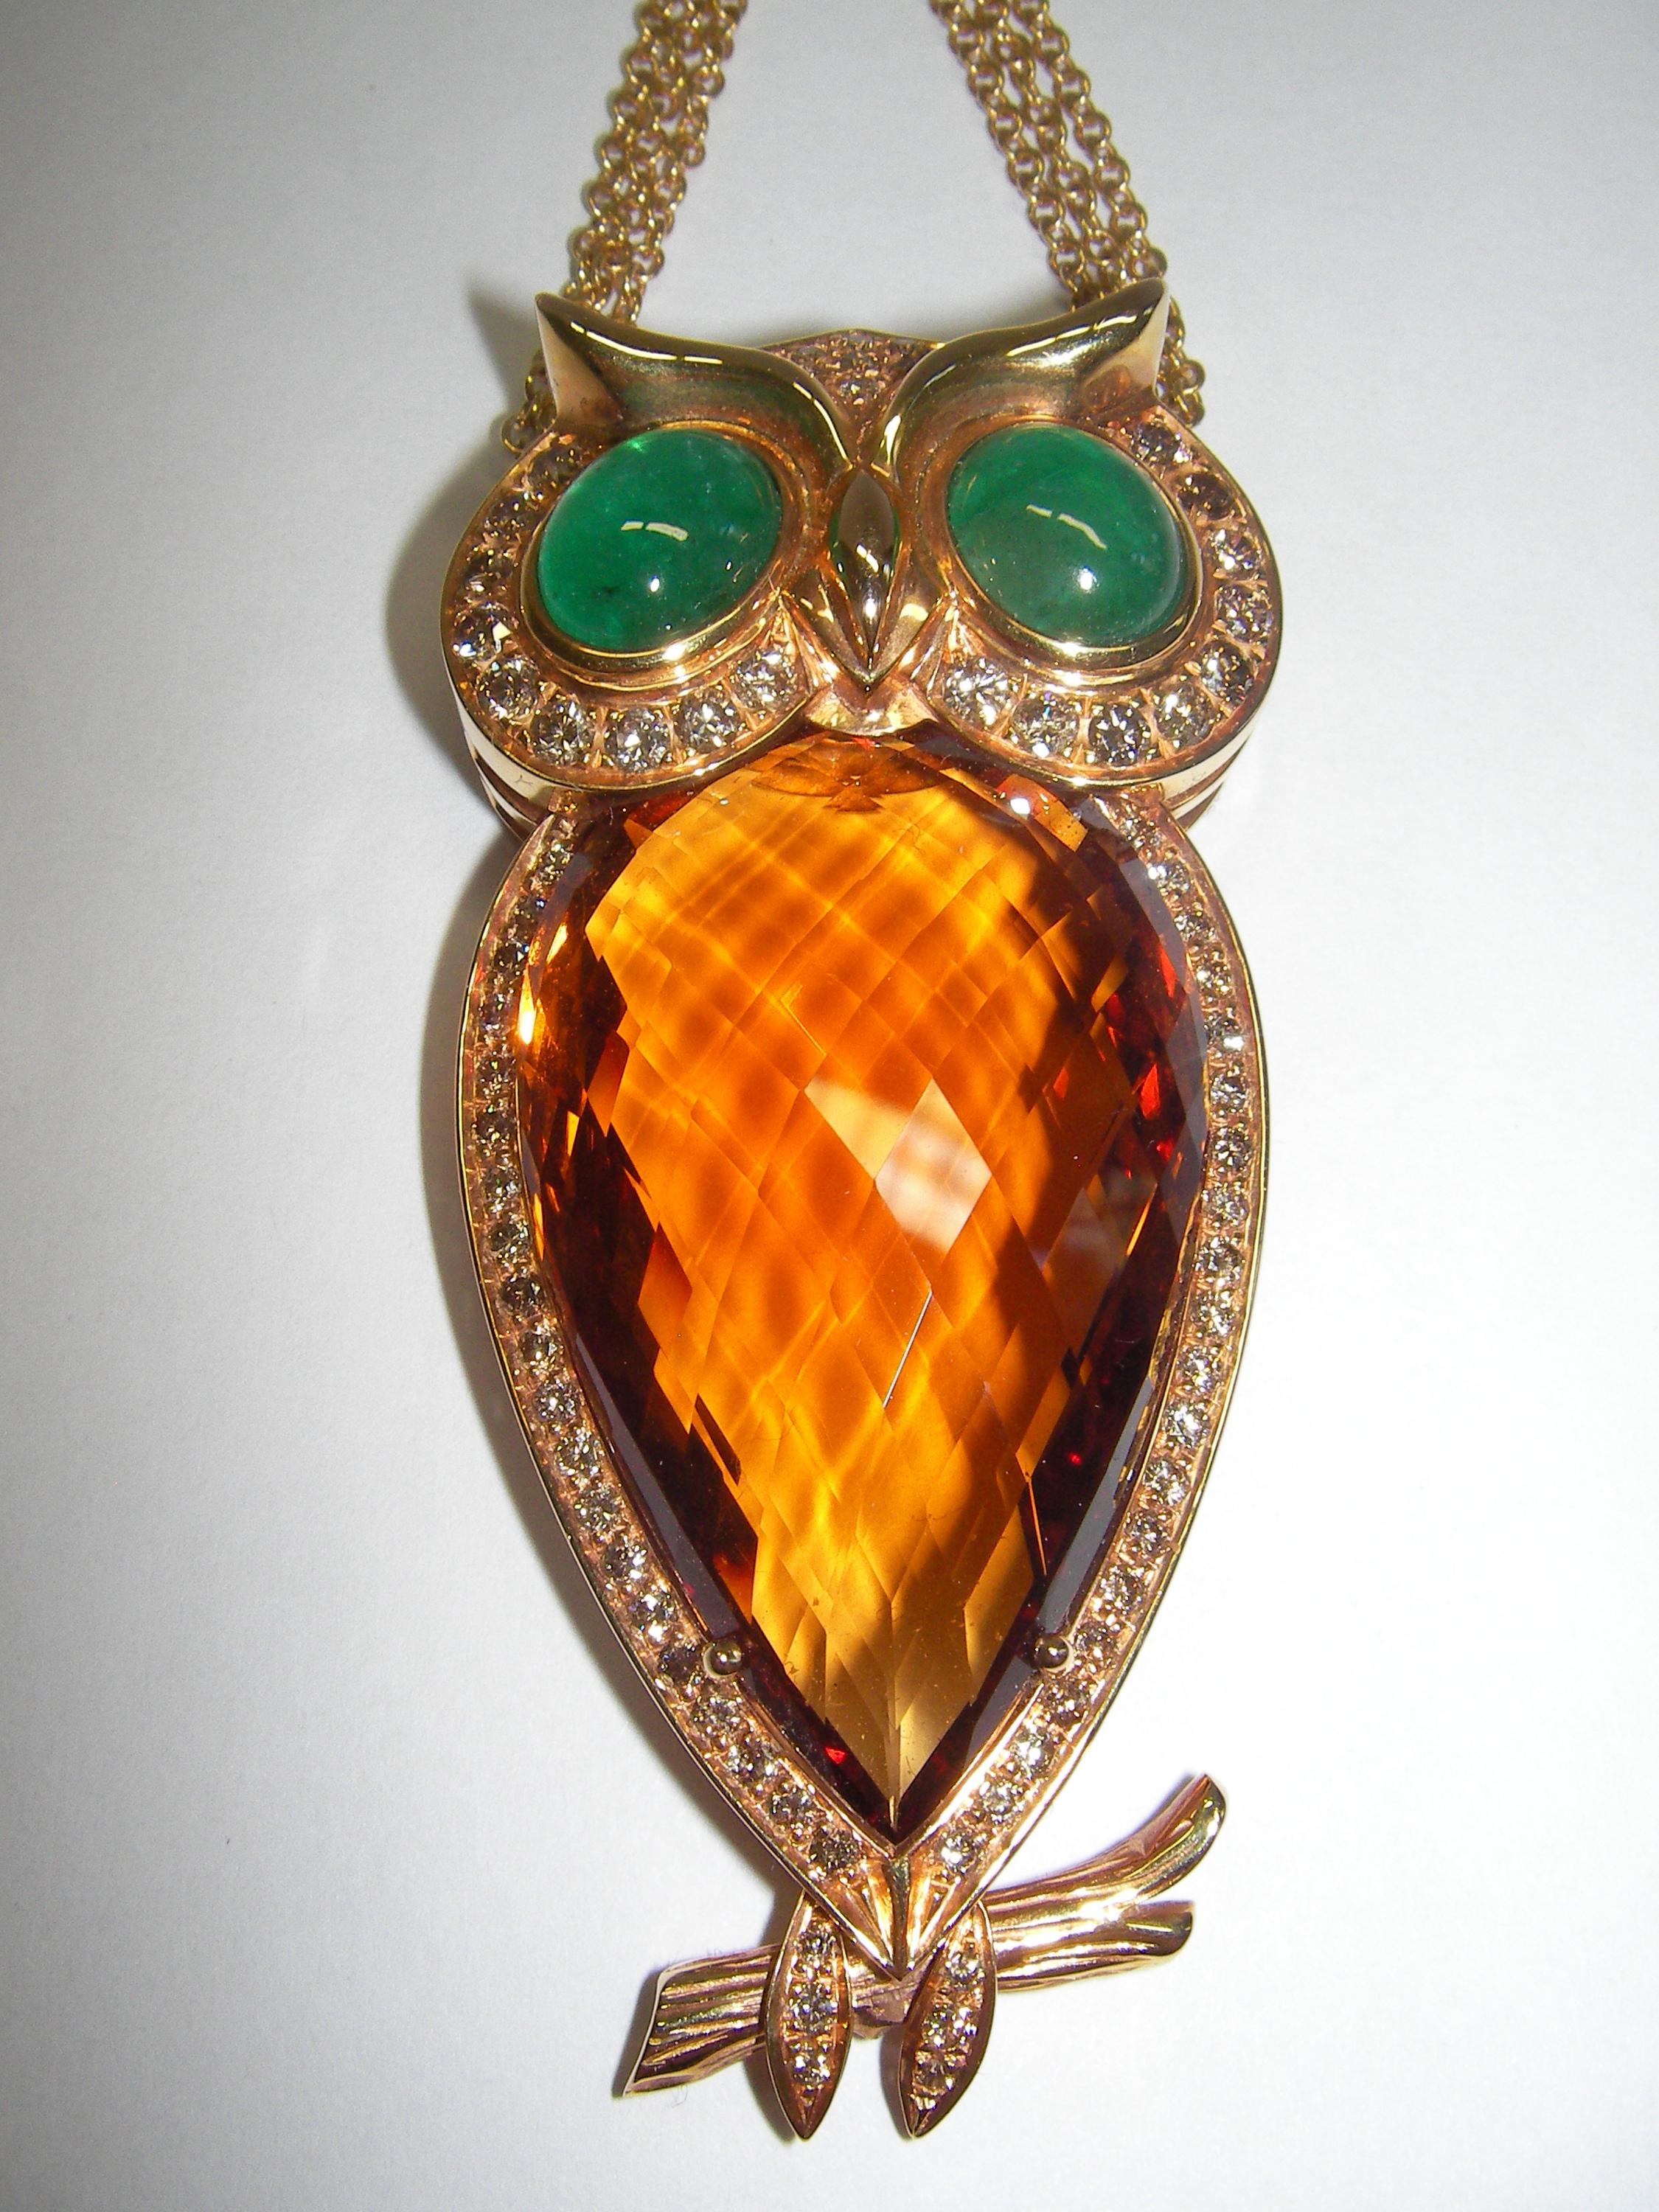 Offered here is a truly unique 18 karat rosé gold Owl shaped pendant set. Elegant Cognac colored Diamonds and vibrant Emeralds enhance the exquisite center Citrine palm stone measuring almost 75 Carat. The delicate anchor link chain compliments this